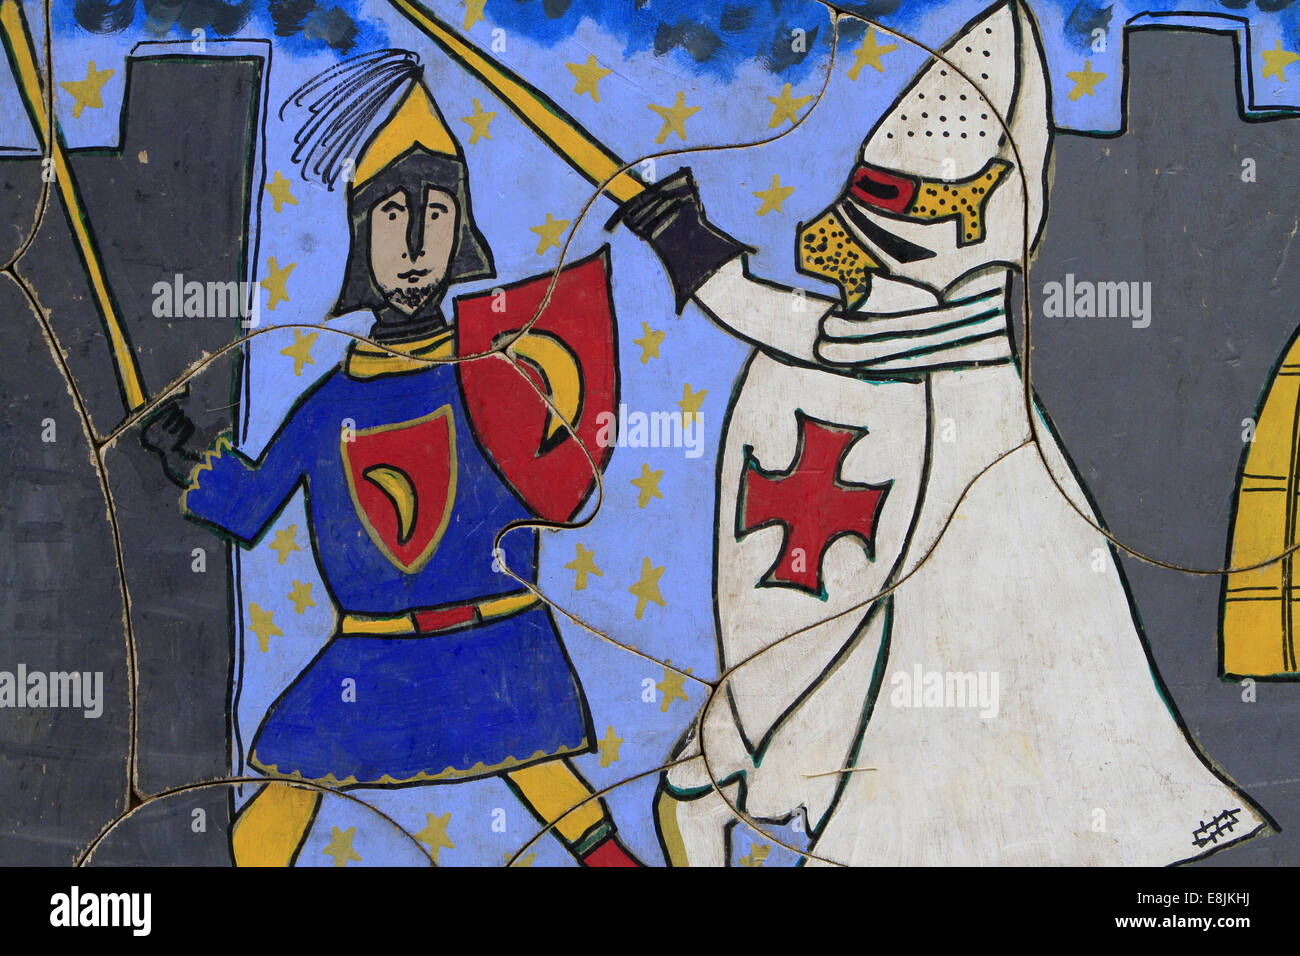 Illustration of the Knights of the Order of the Temple. Stock Photo